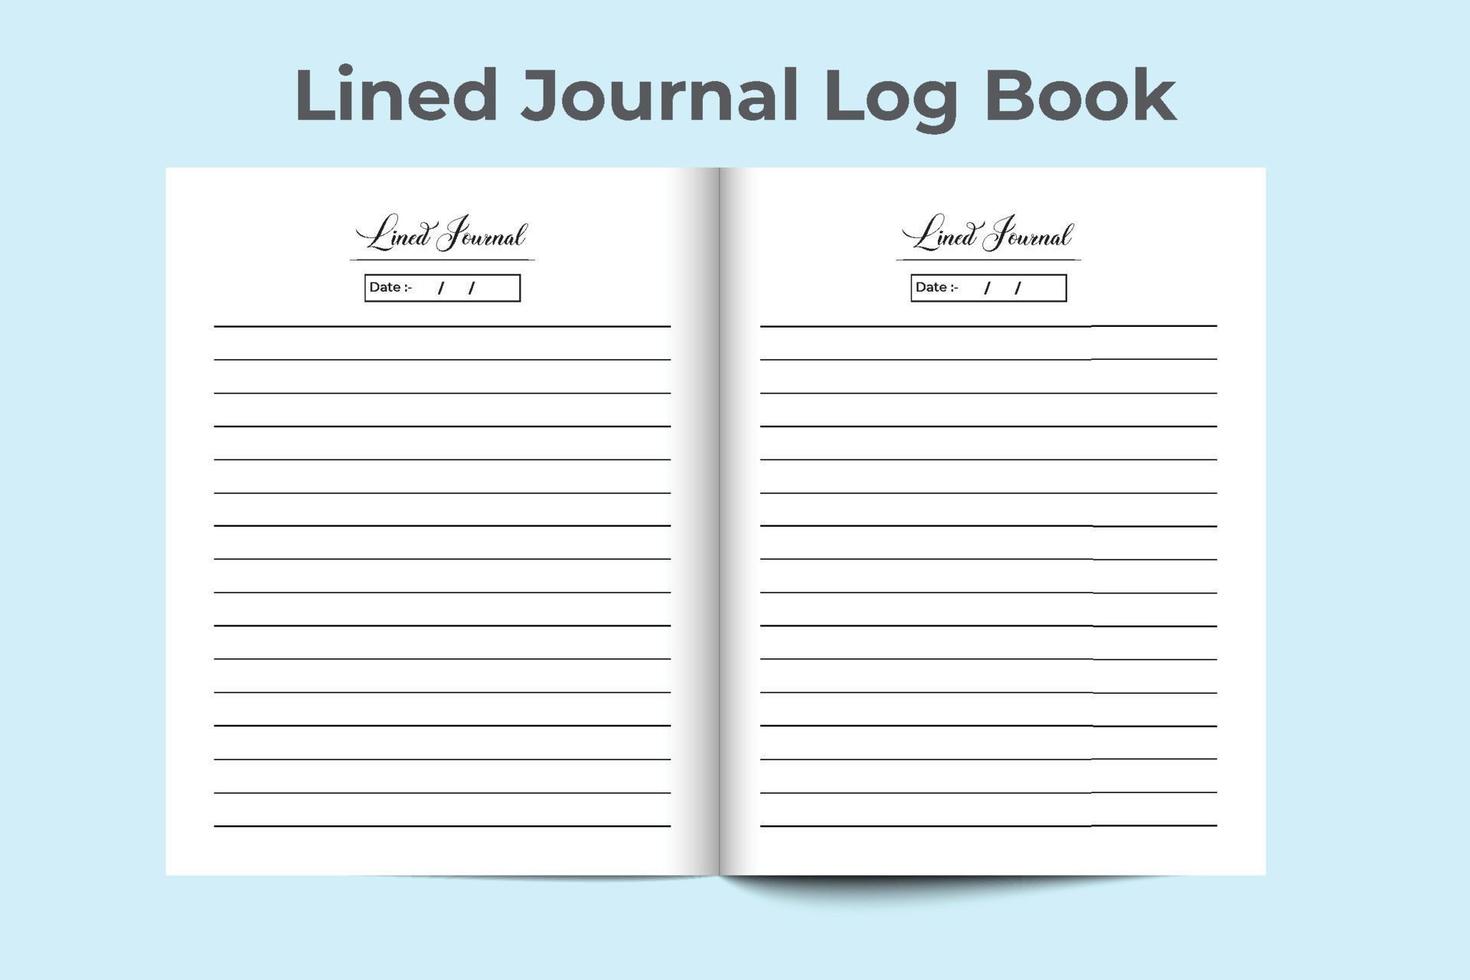 Line journal log book interior. Simple lined journal notebook. Diary interior template. Log book interior. Lined journal interior design. Simple task list diary template. vector